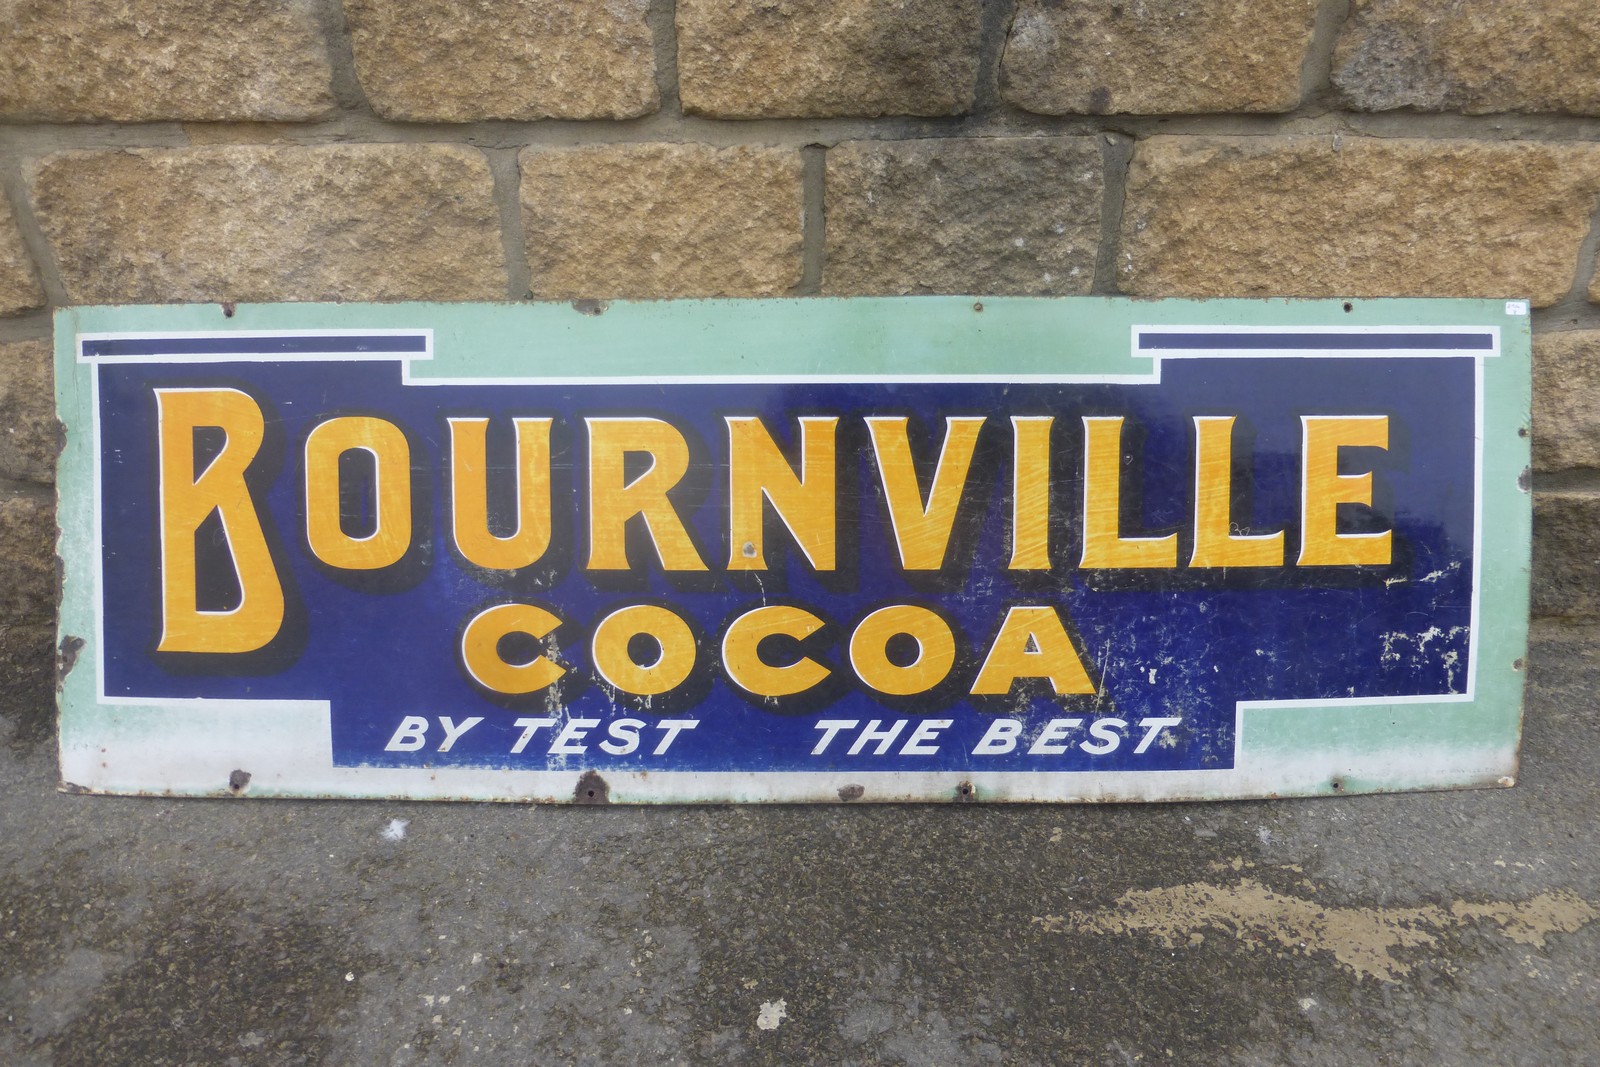 A Bournville Cocoa rectangular enamel sign of unusual colour and design, 48 1/4 x 16".